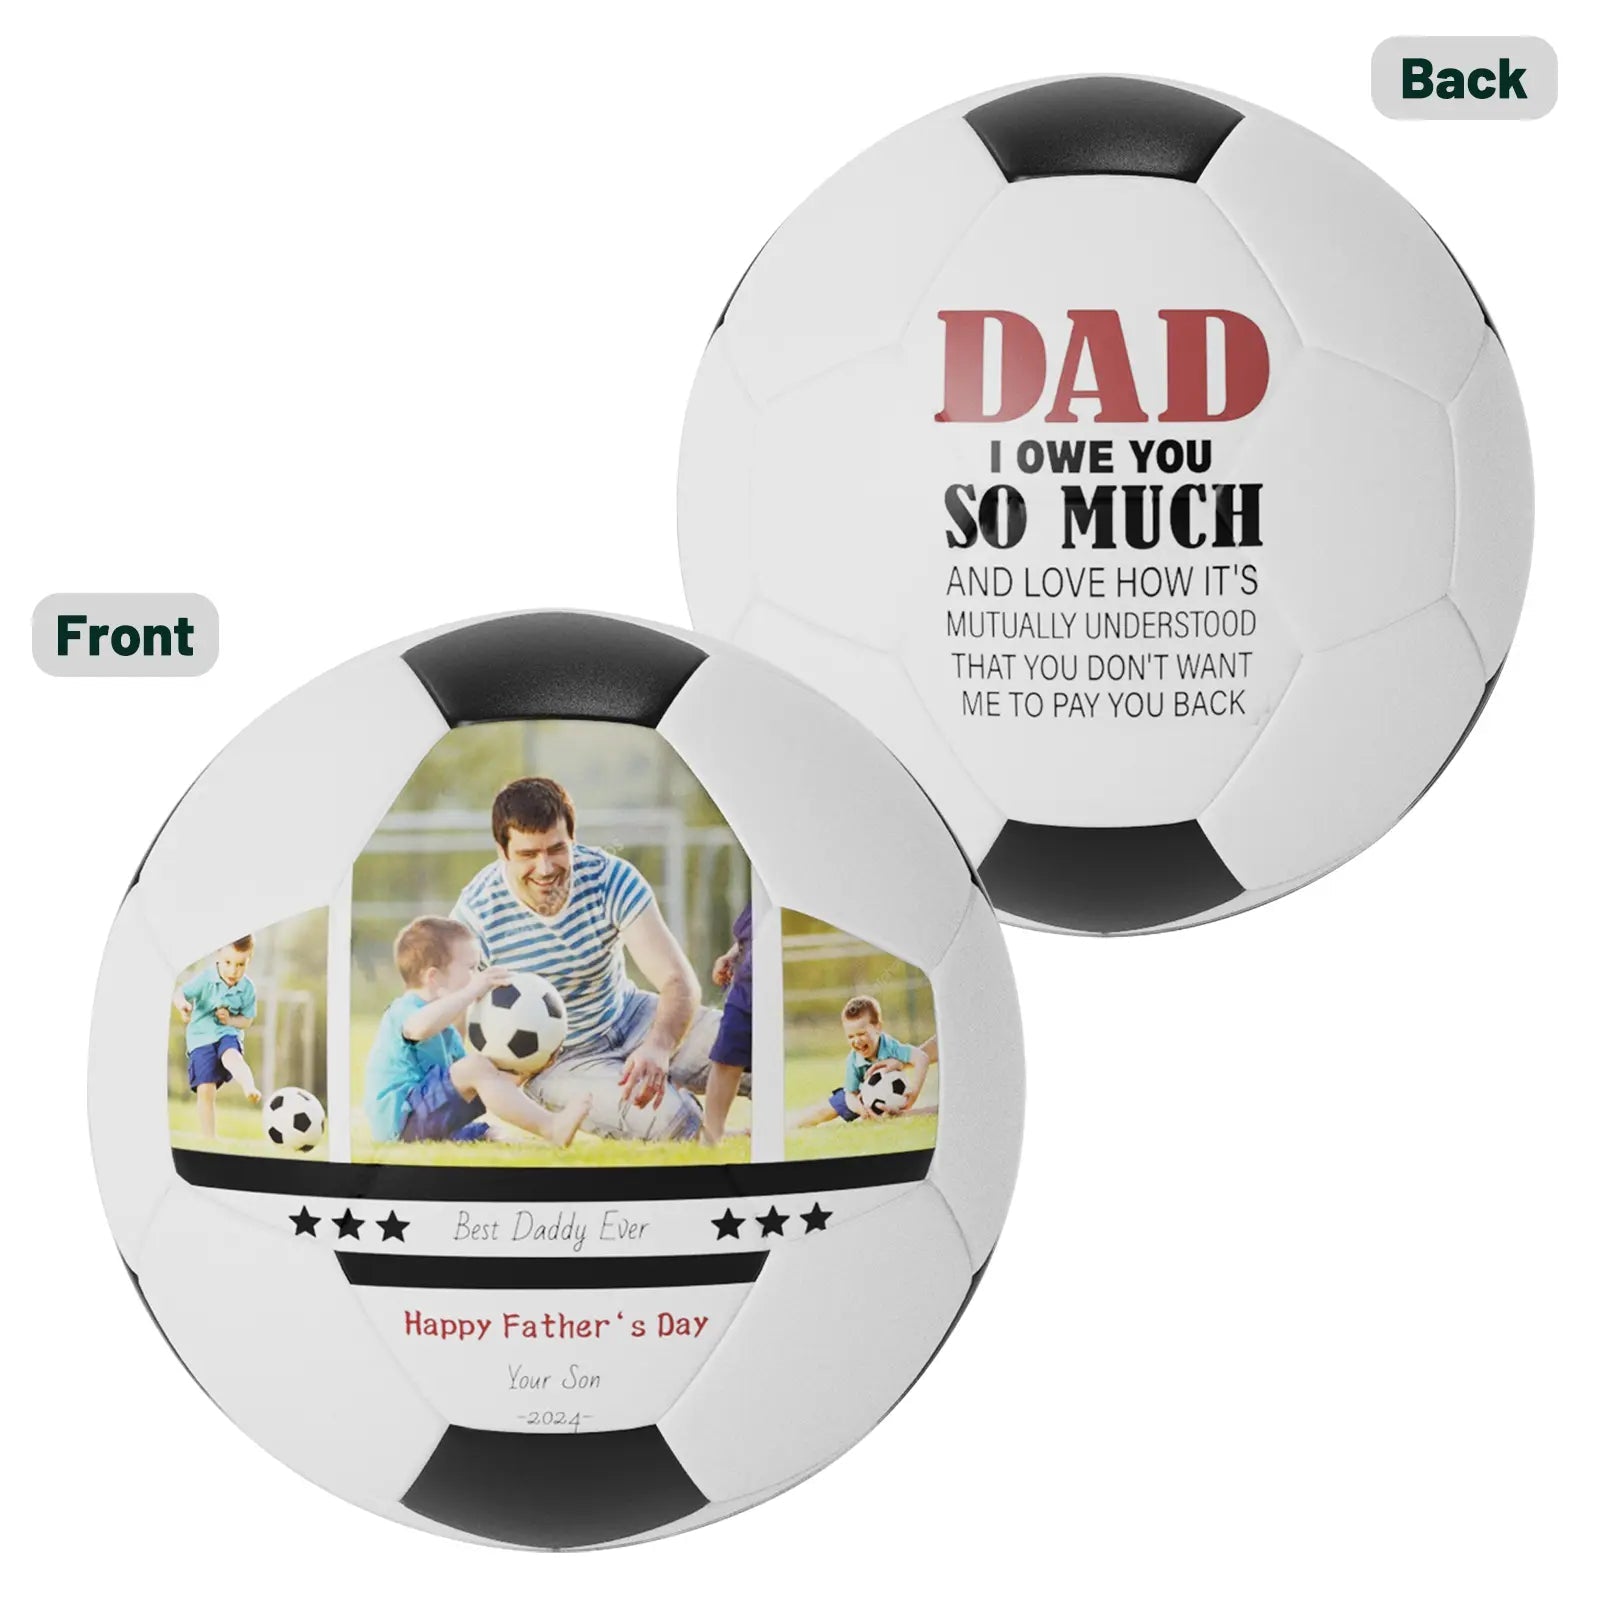 Personalized Custom Photo Soccer Ball Gifts For Dad,Grandpa,Son,Grandson - Family Watchs